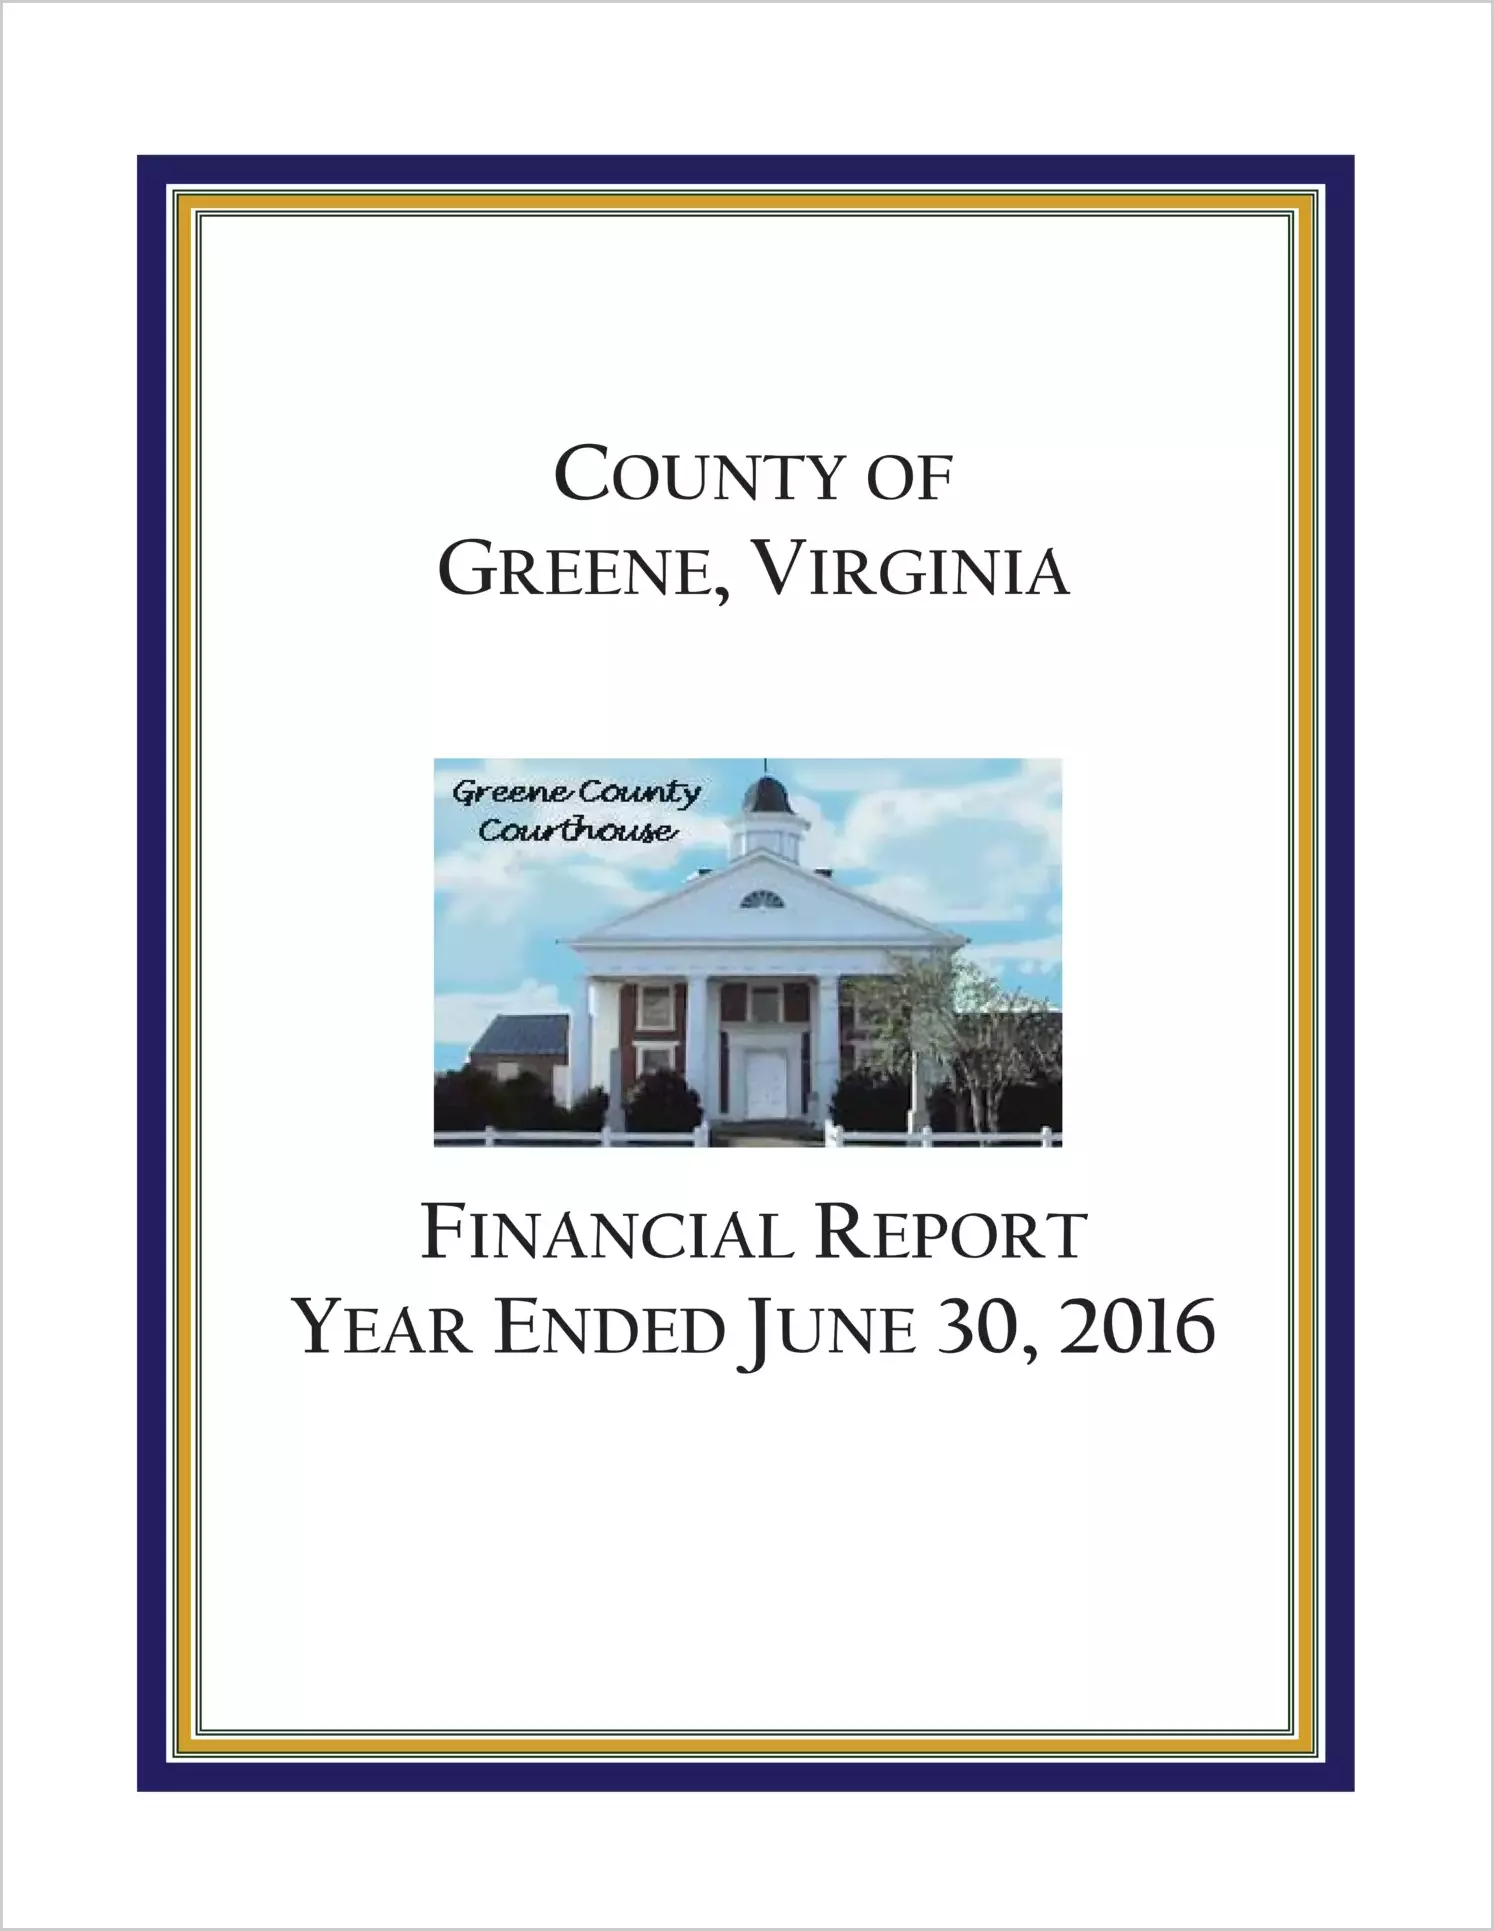 2016 Annual Financial Report for County of Greene